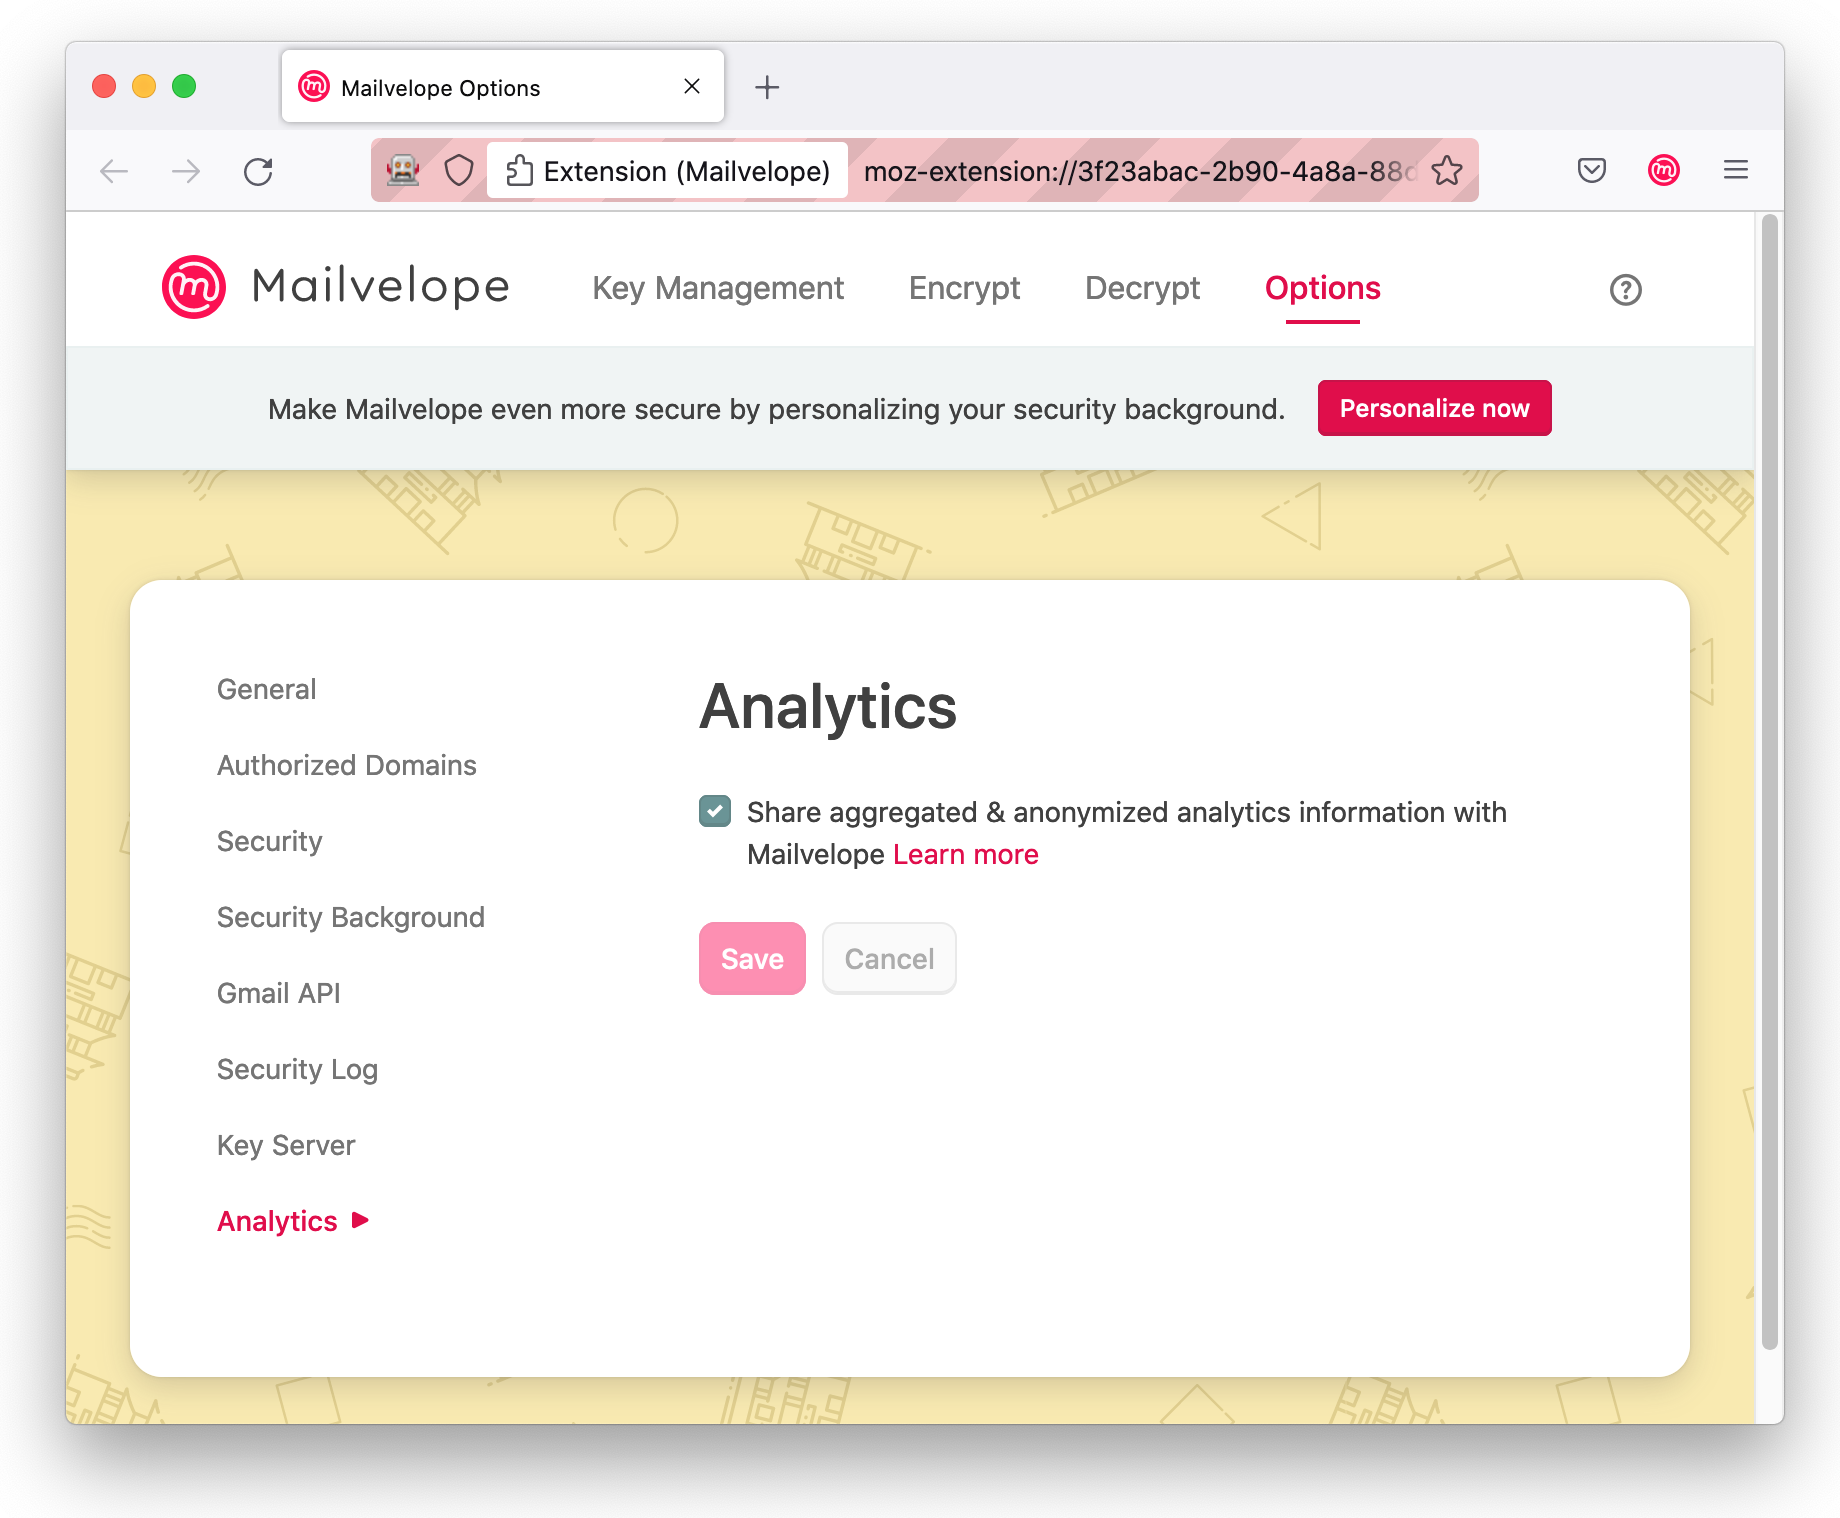 mailvelope analytics settings page